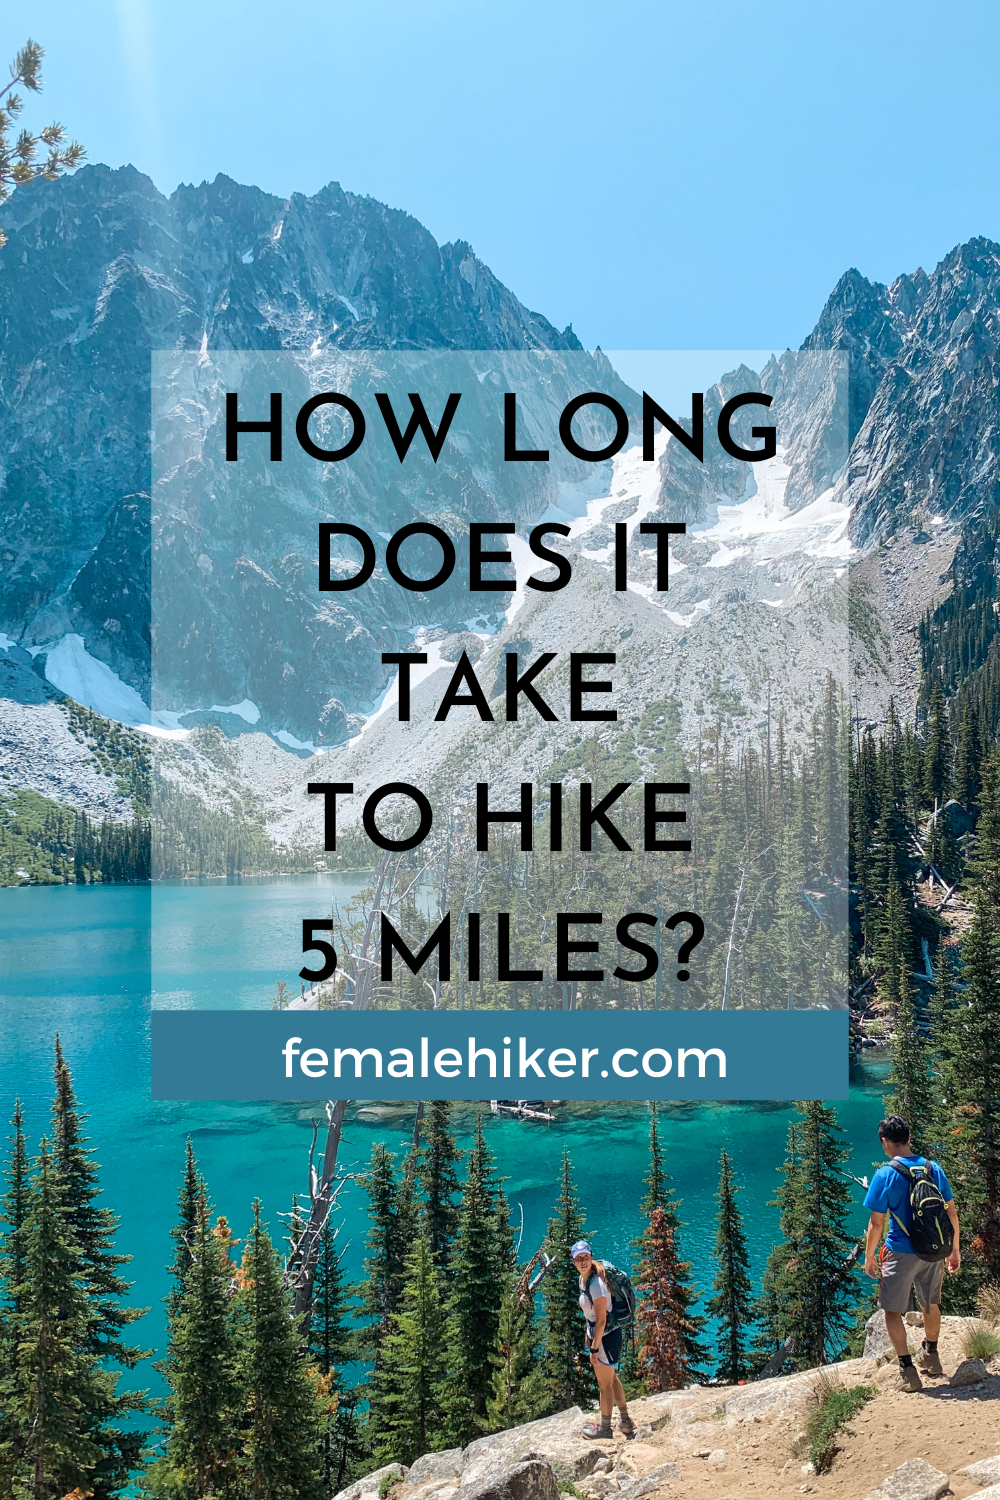 How Long Does it Take to Hike 5 Miles? 1